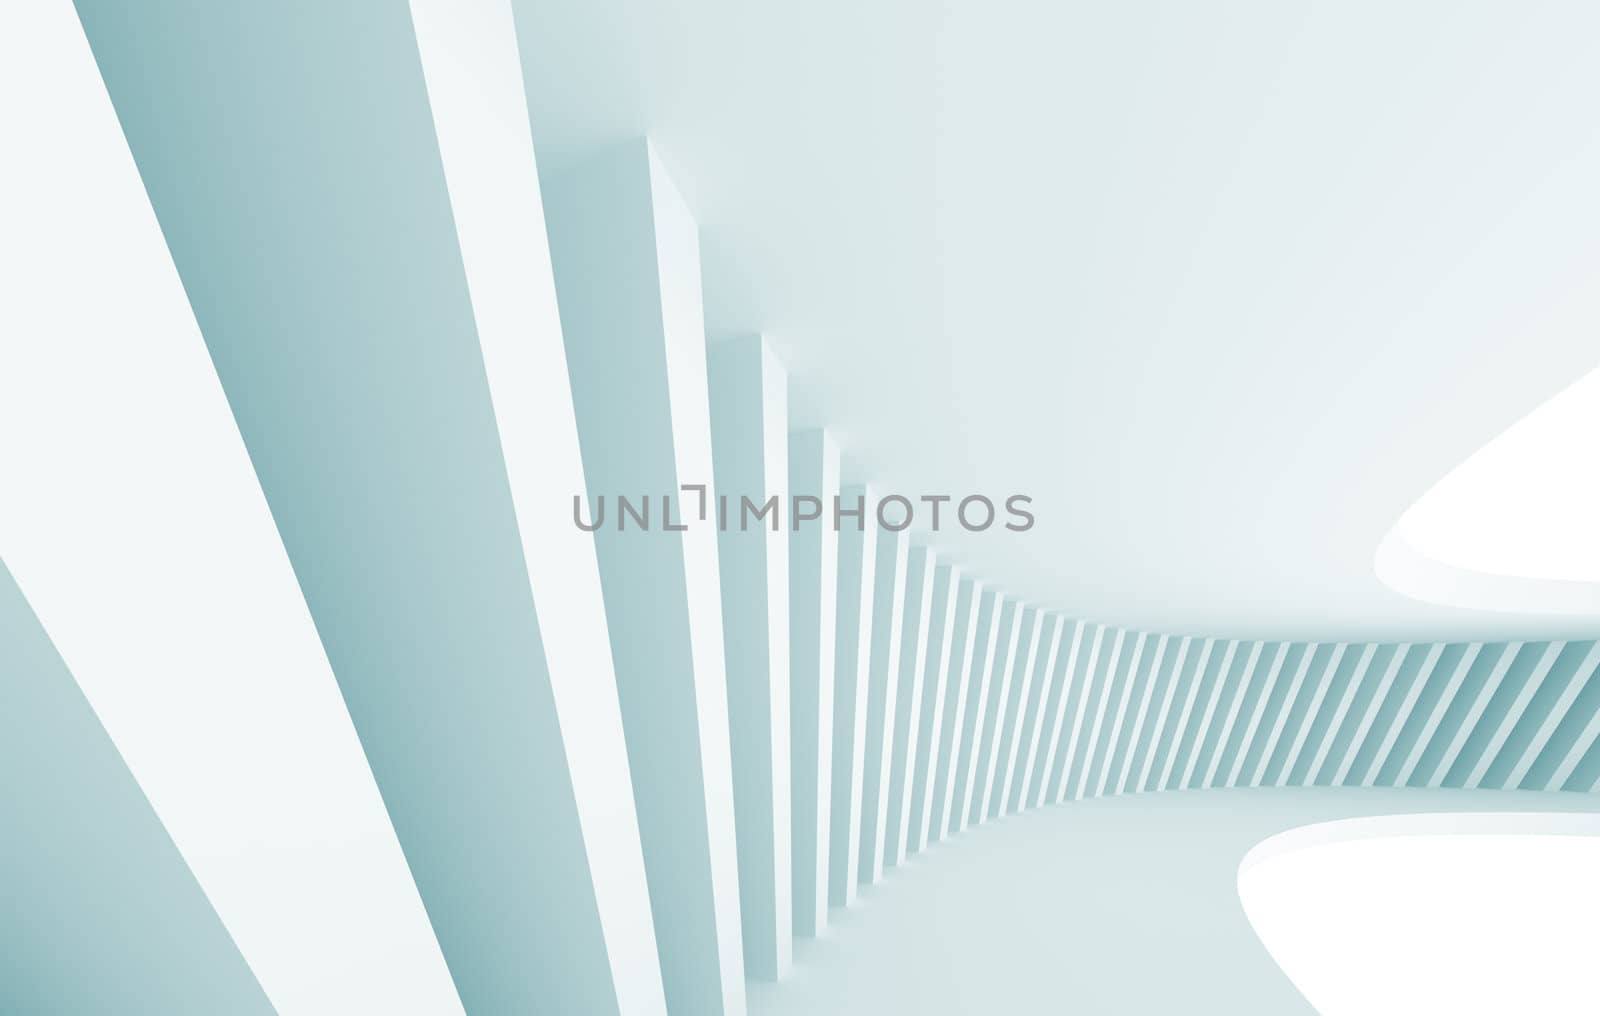 3d Illustration of Blue Abstract Architectural Design